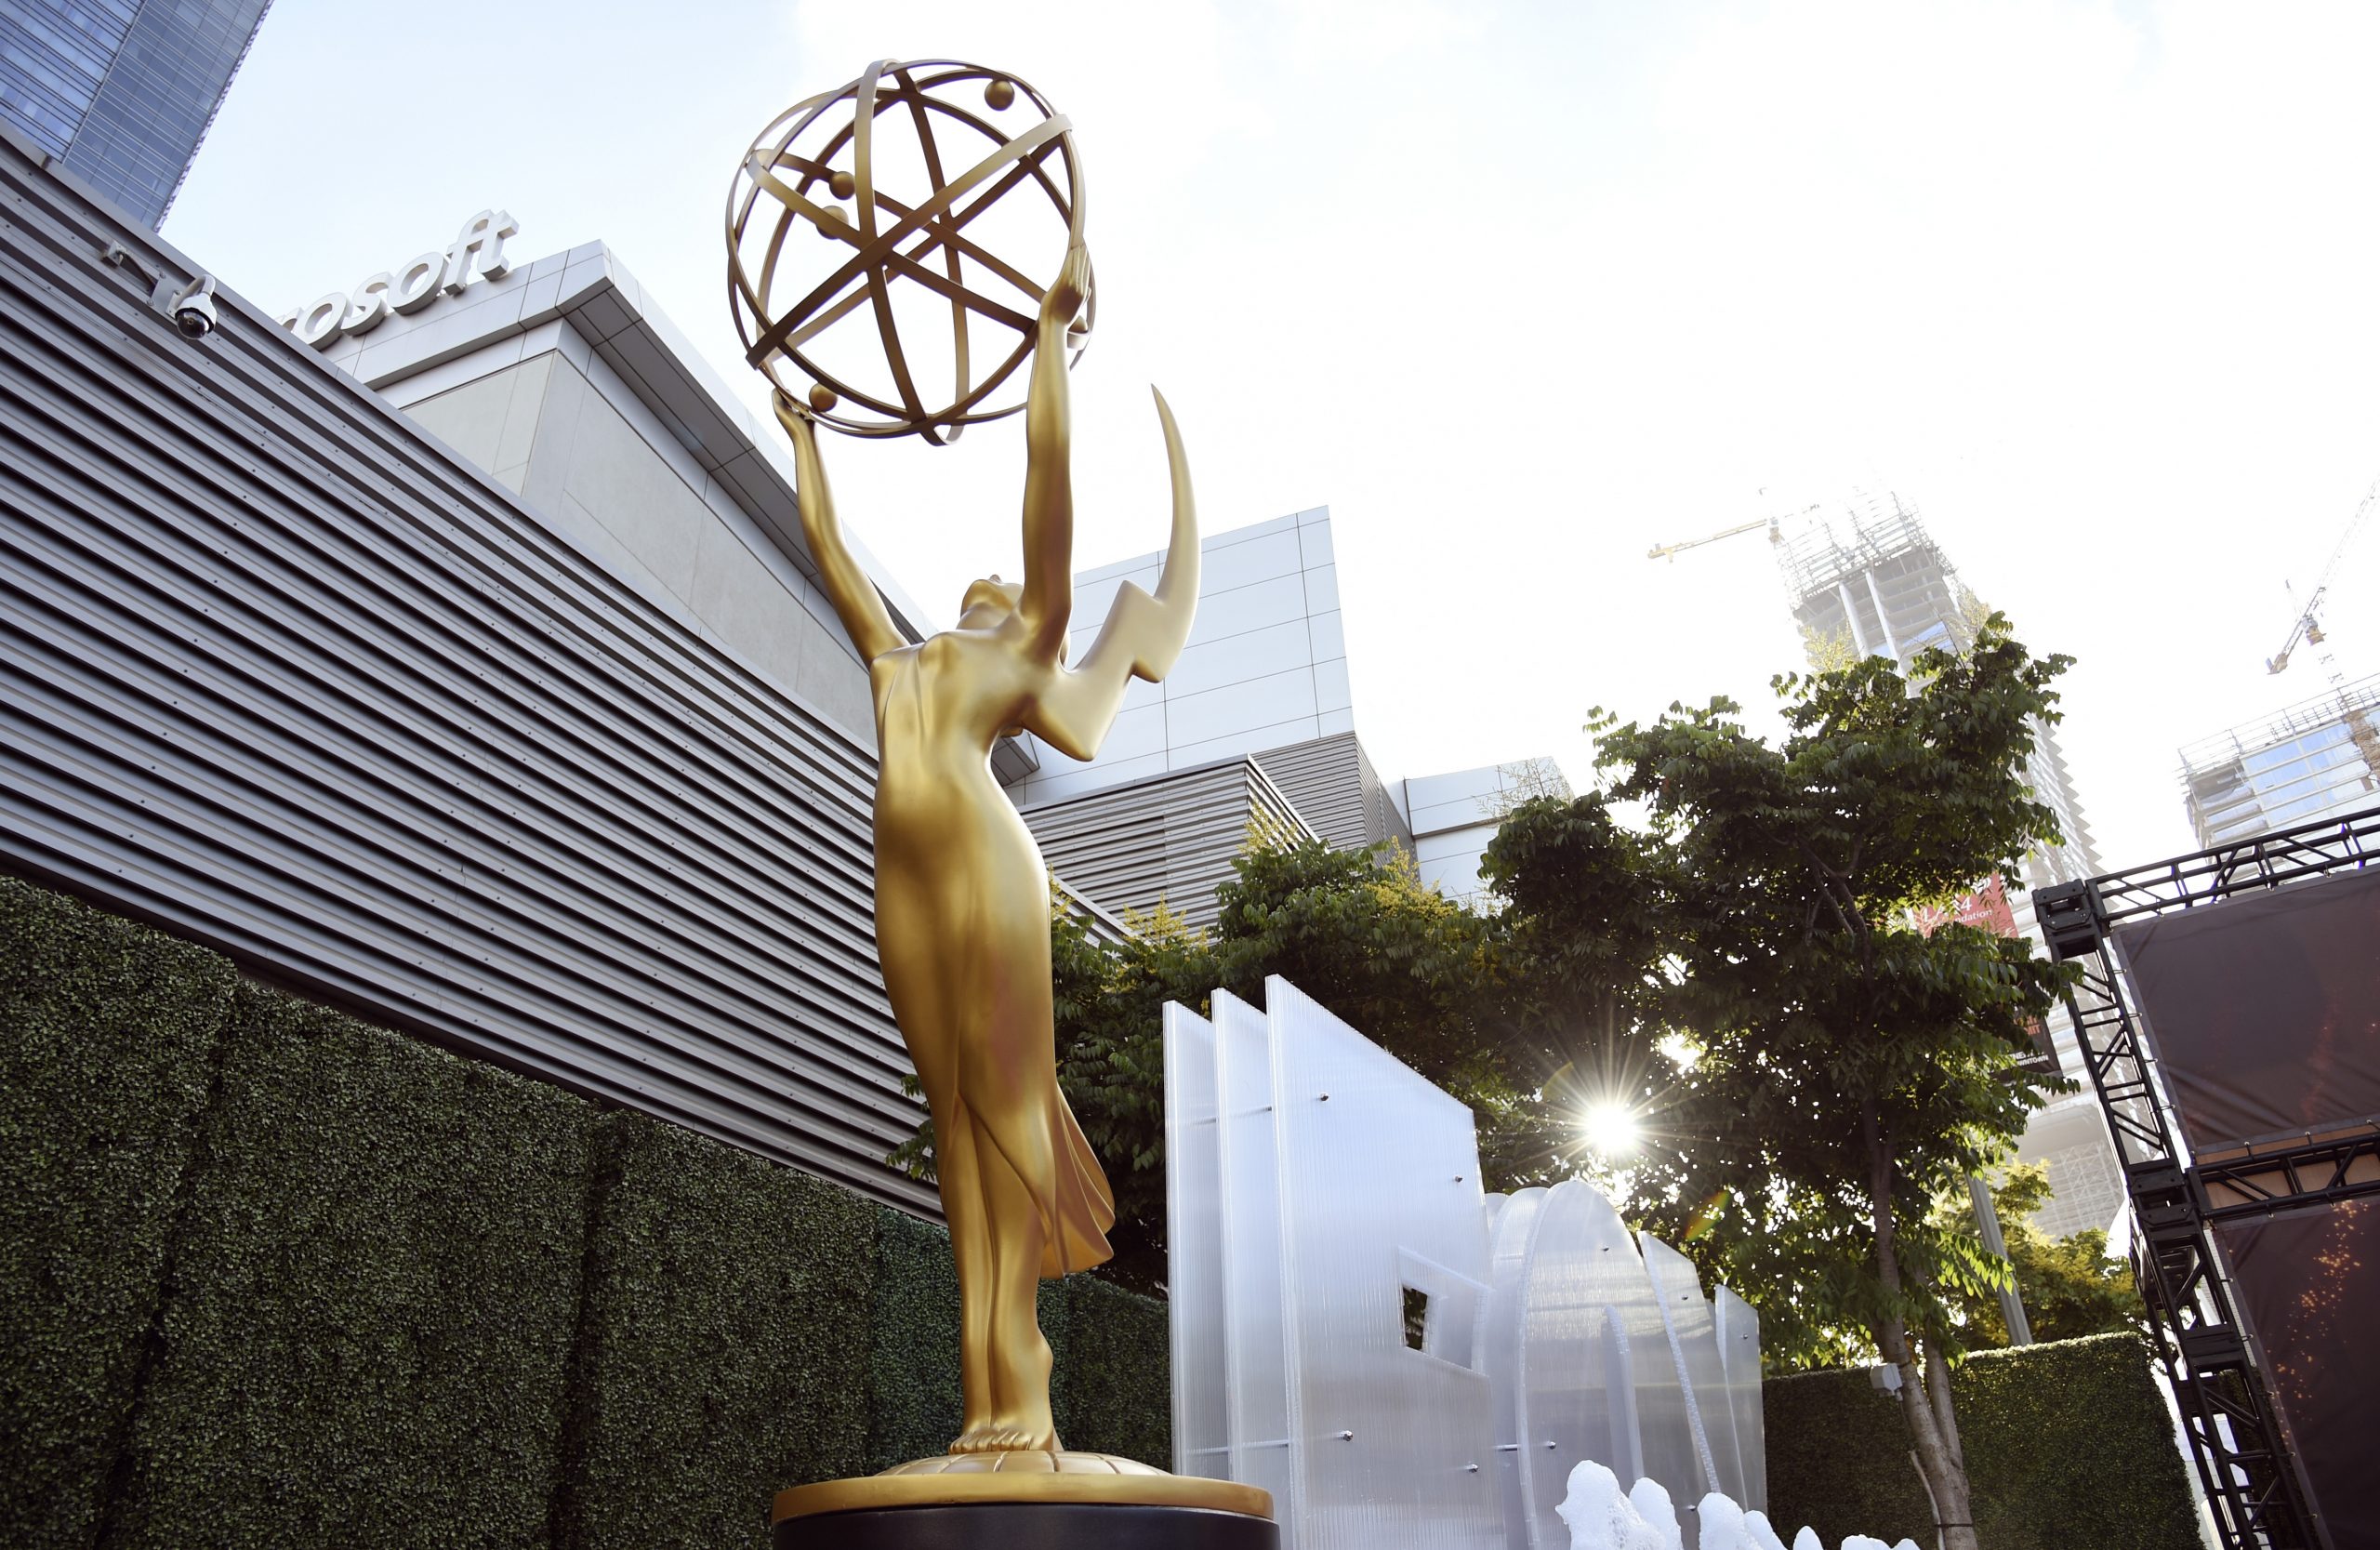 An Emmy statue stands outside the Microsoft Theater during Press Preview Day for Sunday's 71st Primetime Emmy Awards, Thursday, Sept. 19, 2019, in Los Angeles. (Photo by Chris Pizzello/Invision/AP)